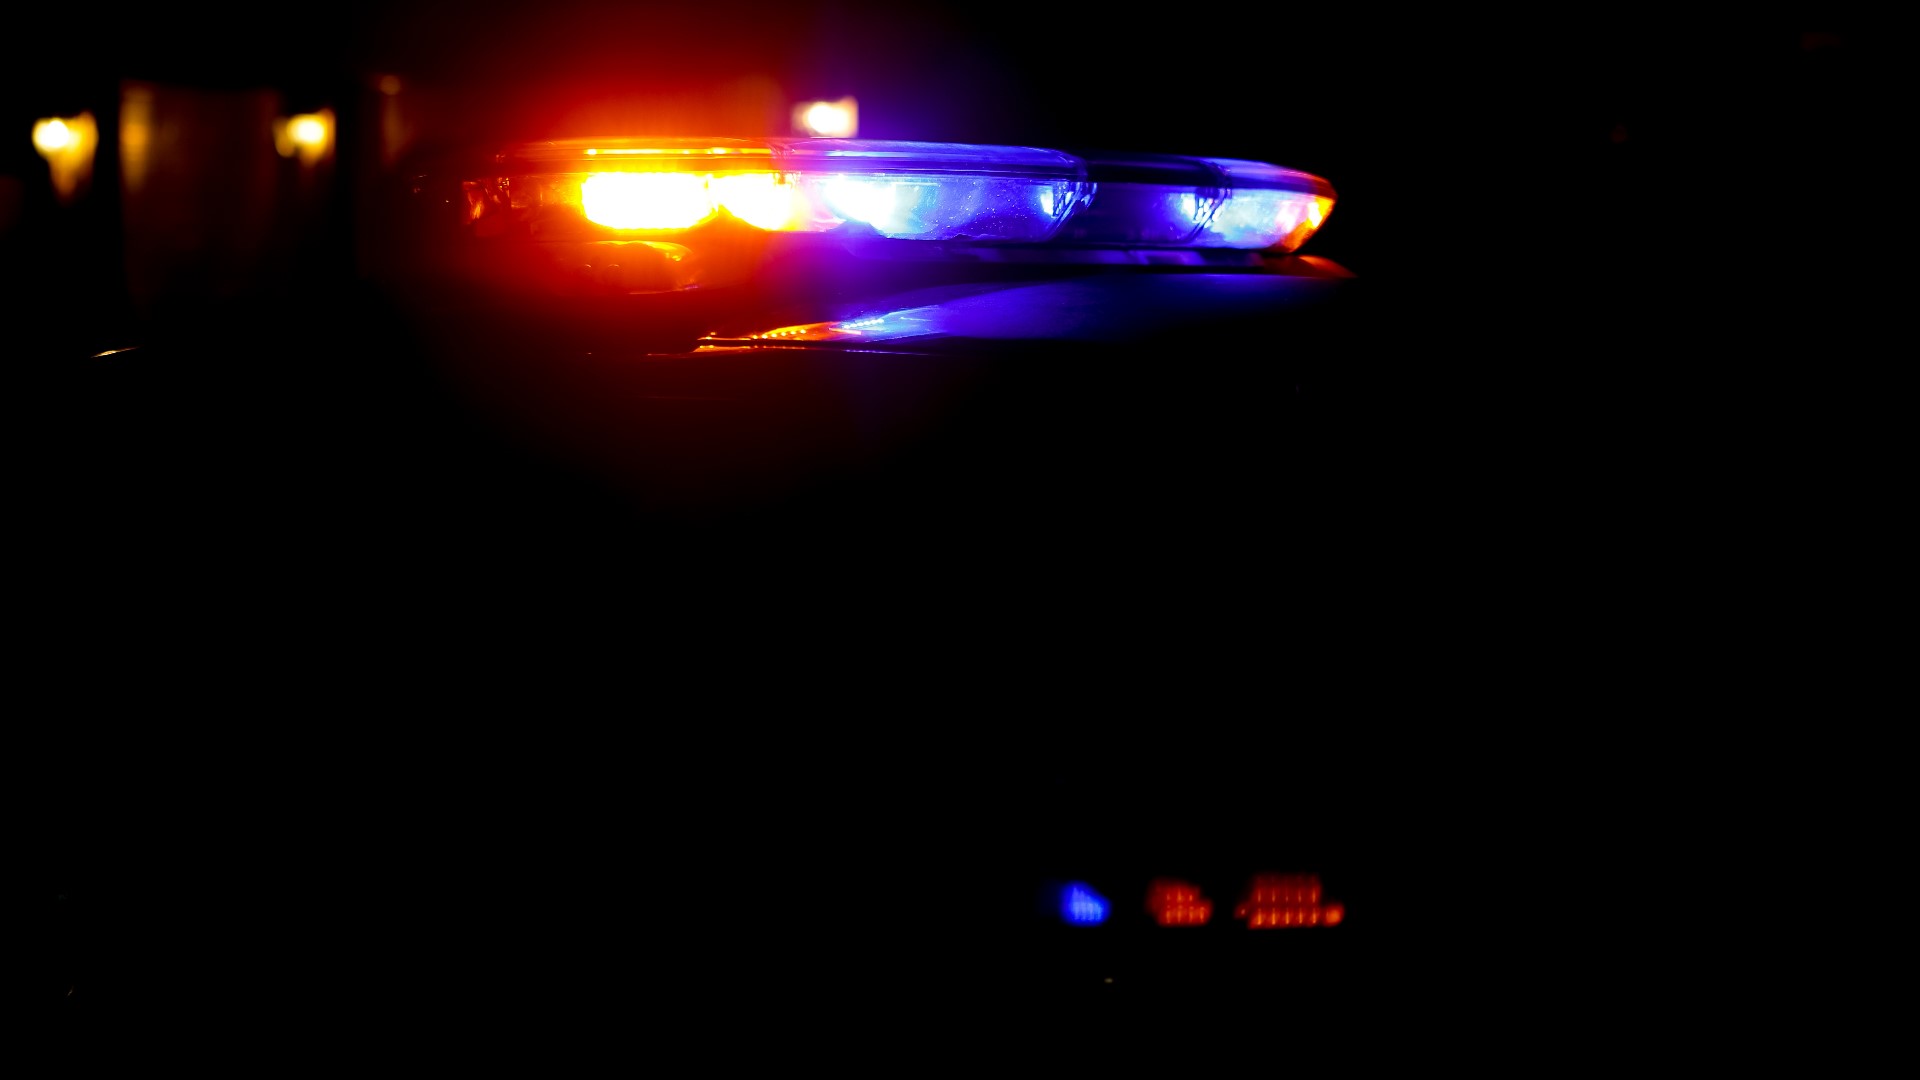 According to the Ohio State Highway Patrol, the bicyclist was heading southbound on Norton Road, just north of Alkire Road near Galloway, at 10:19 p.m.